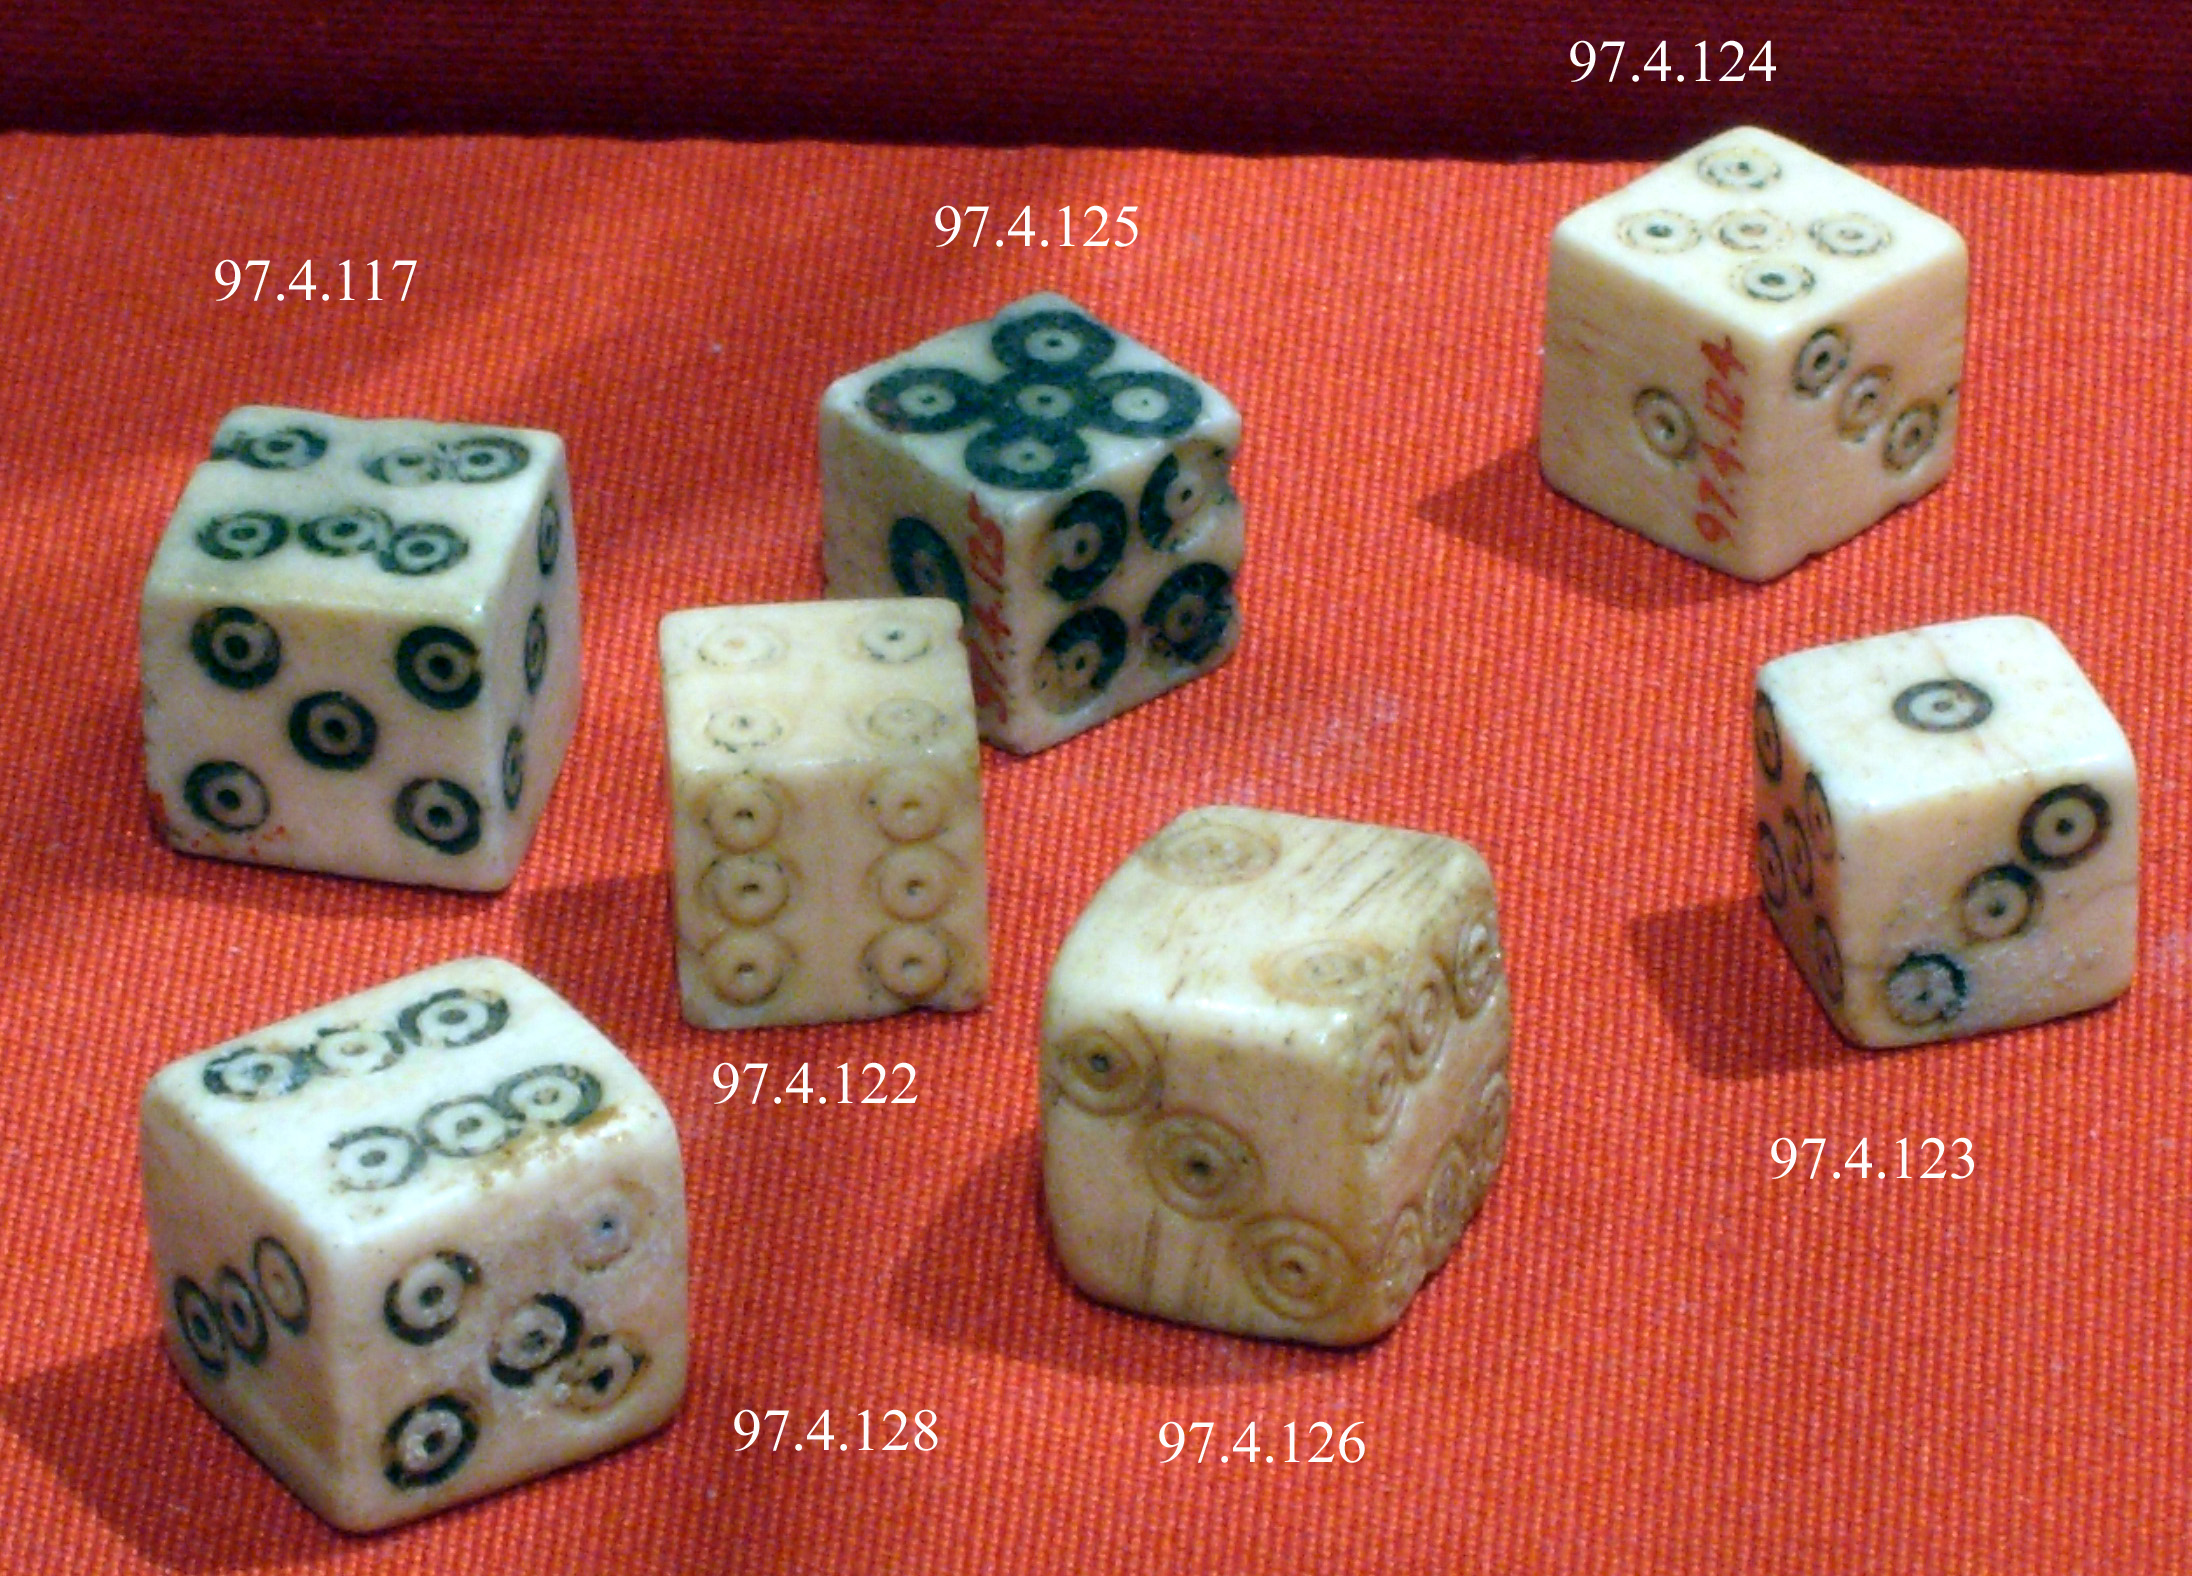 Ancient Egyptian dice, Dice from ancient Egyptian games. Lo…